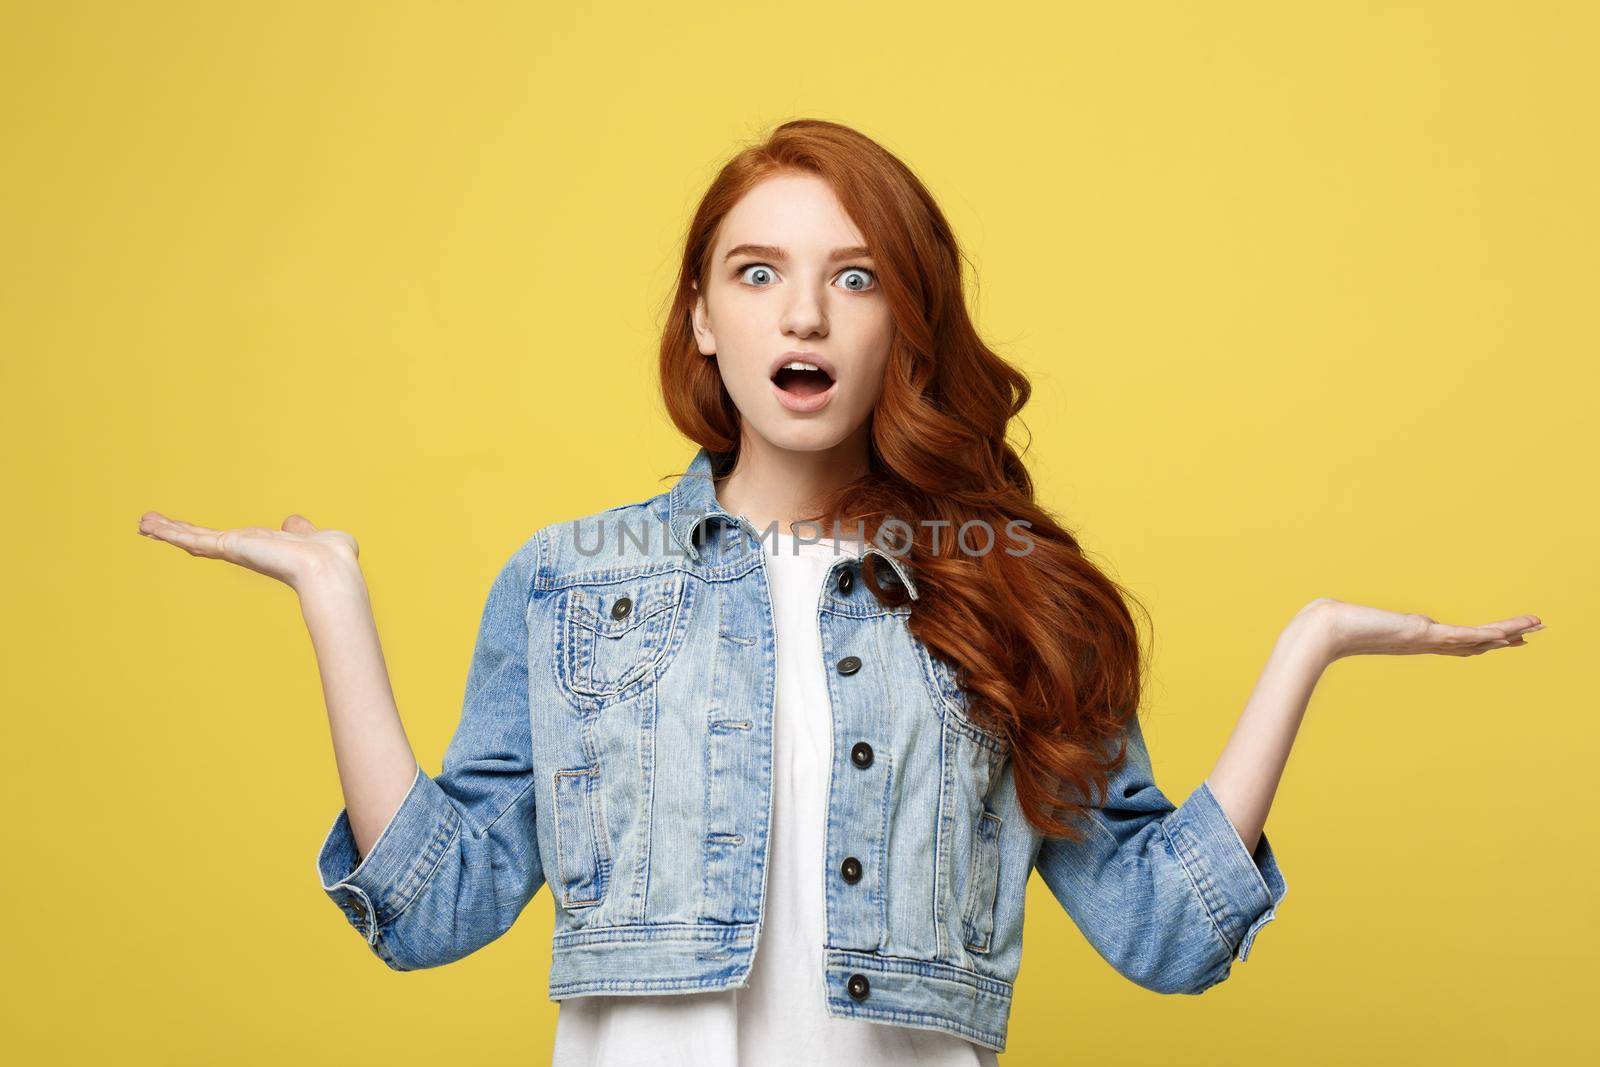 Lifestyle Concept: Surprised young woman with hand on side over golden yellow background. Looking at camera